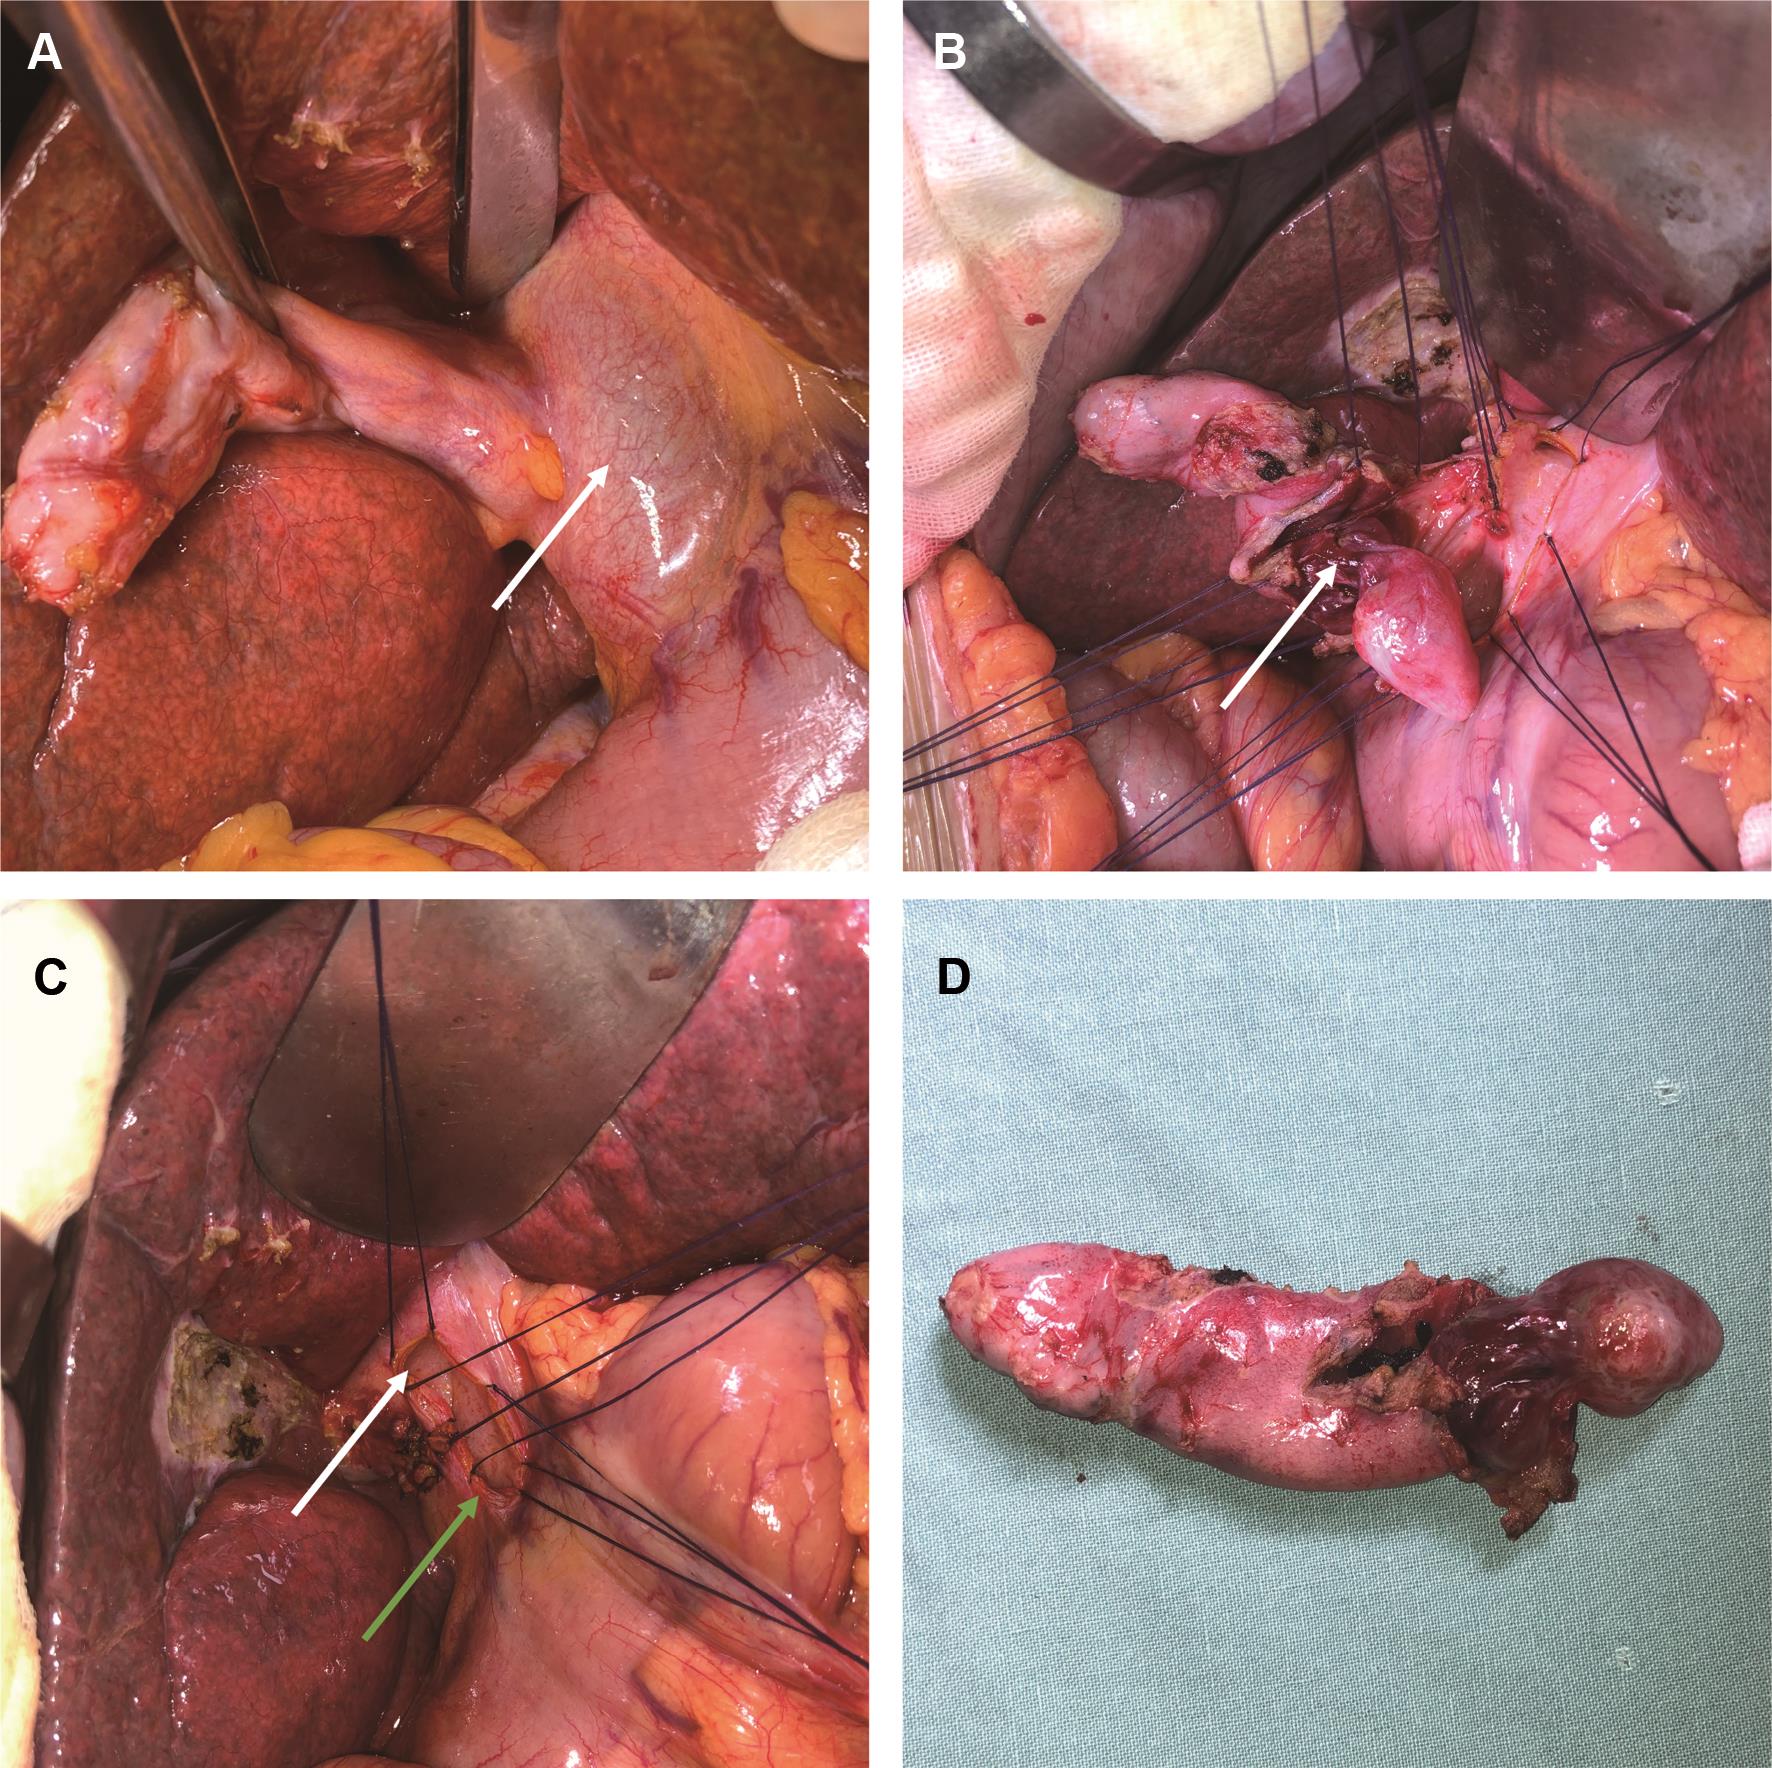 A cystic duct-origin mass was found during the operation to block the common bile duct.